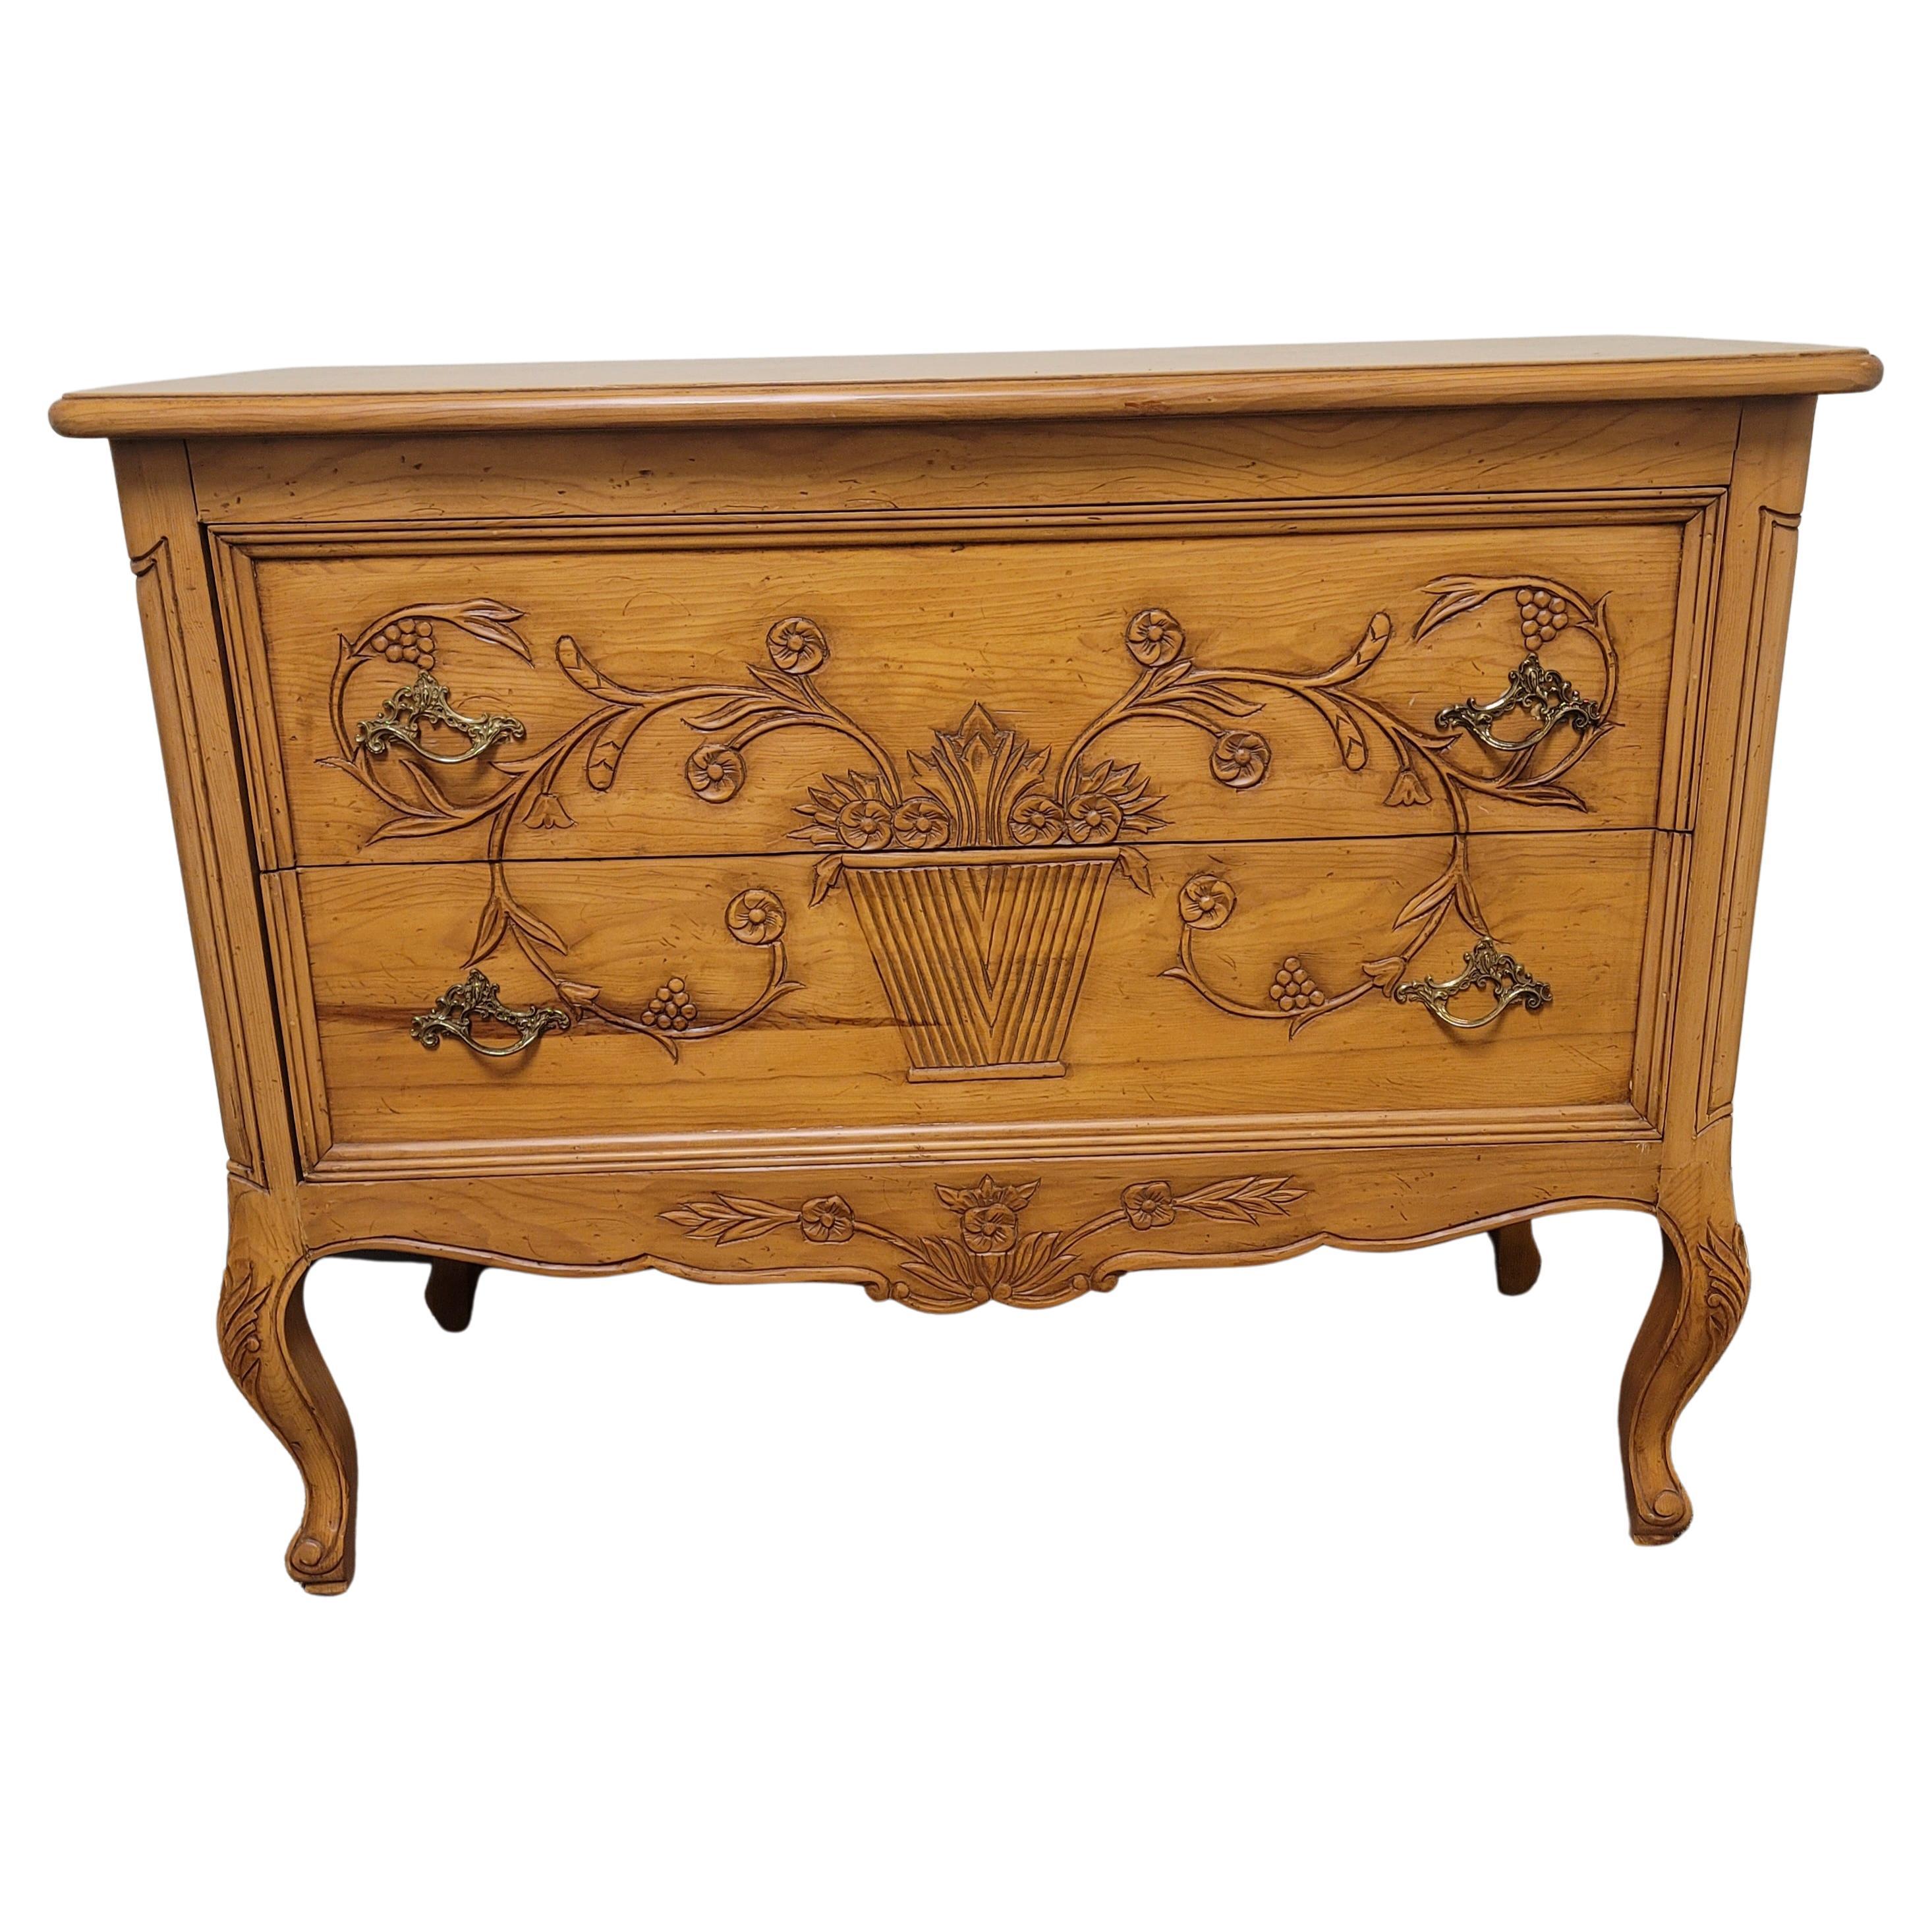 An exquisite, hand-carved hand-crafted arts and craft mixed with Provincial Style Fruitwood Commode by Wellesley Guild. Beautiful hand-carved flower bouquet in planter spands over the two drawers to create a rare visual effect of singularity and